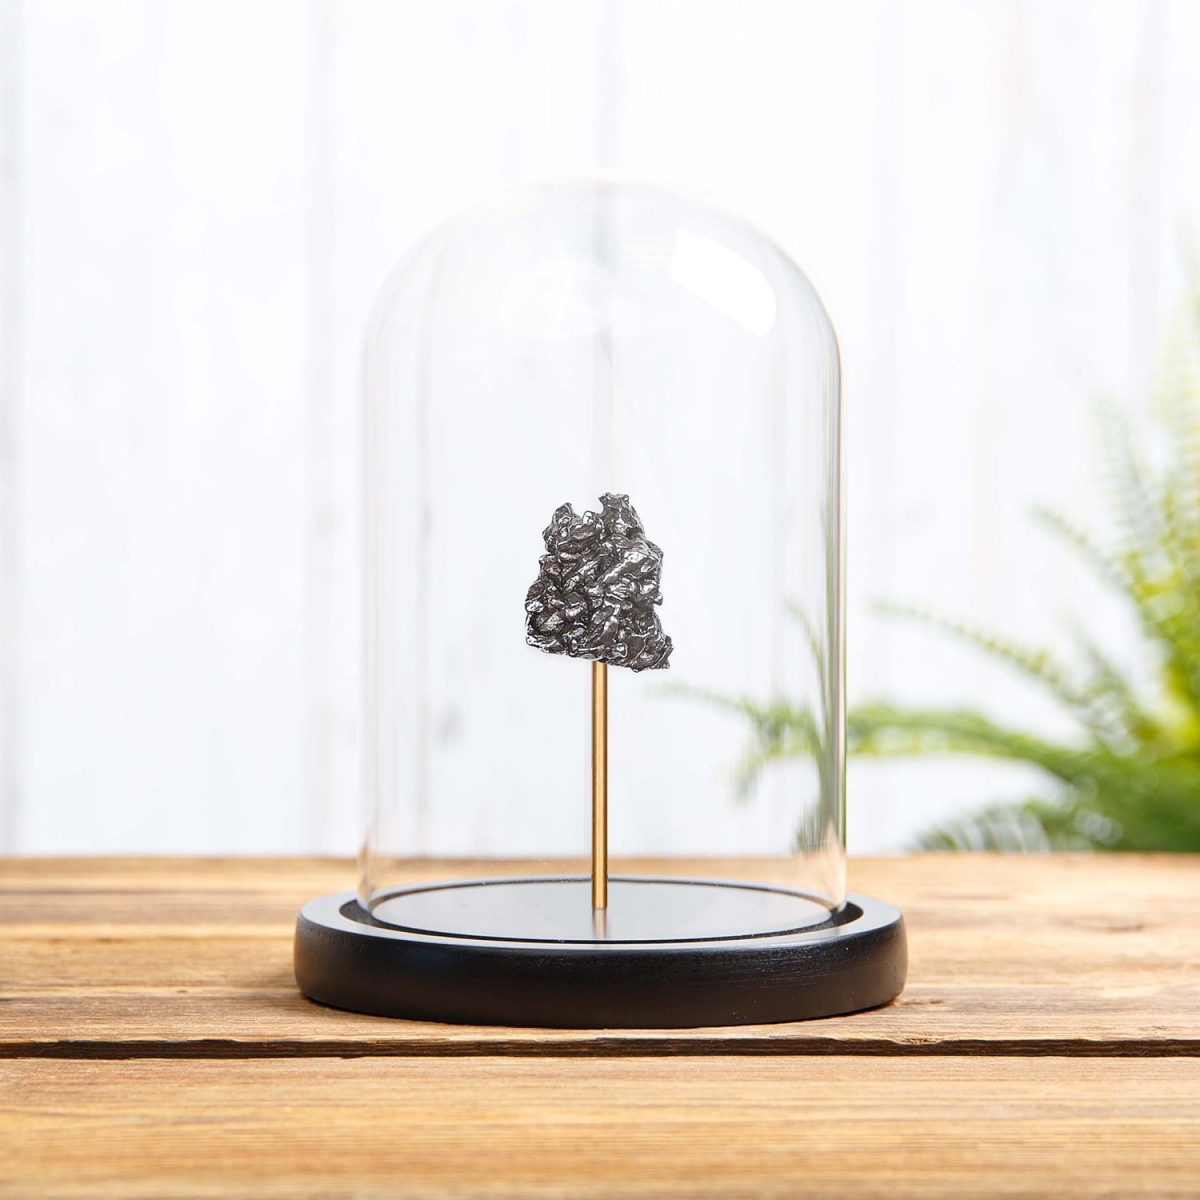 Minibeast Campo del Cielo Meteorite 30-40g in Glass Dome with Wooden base